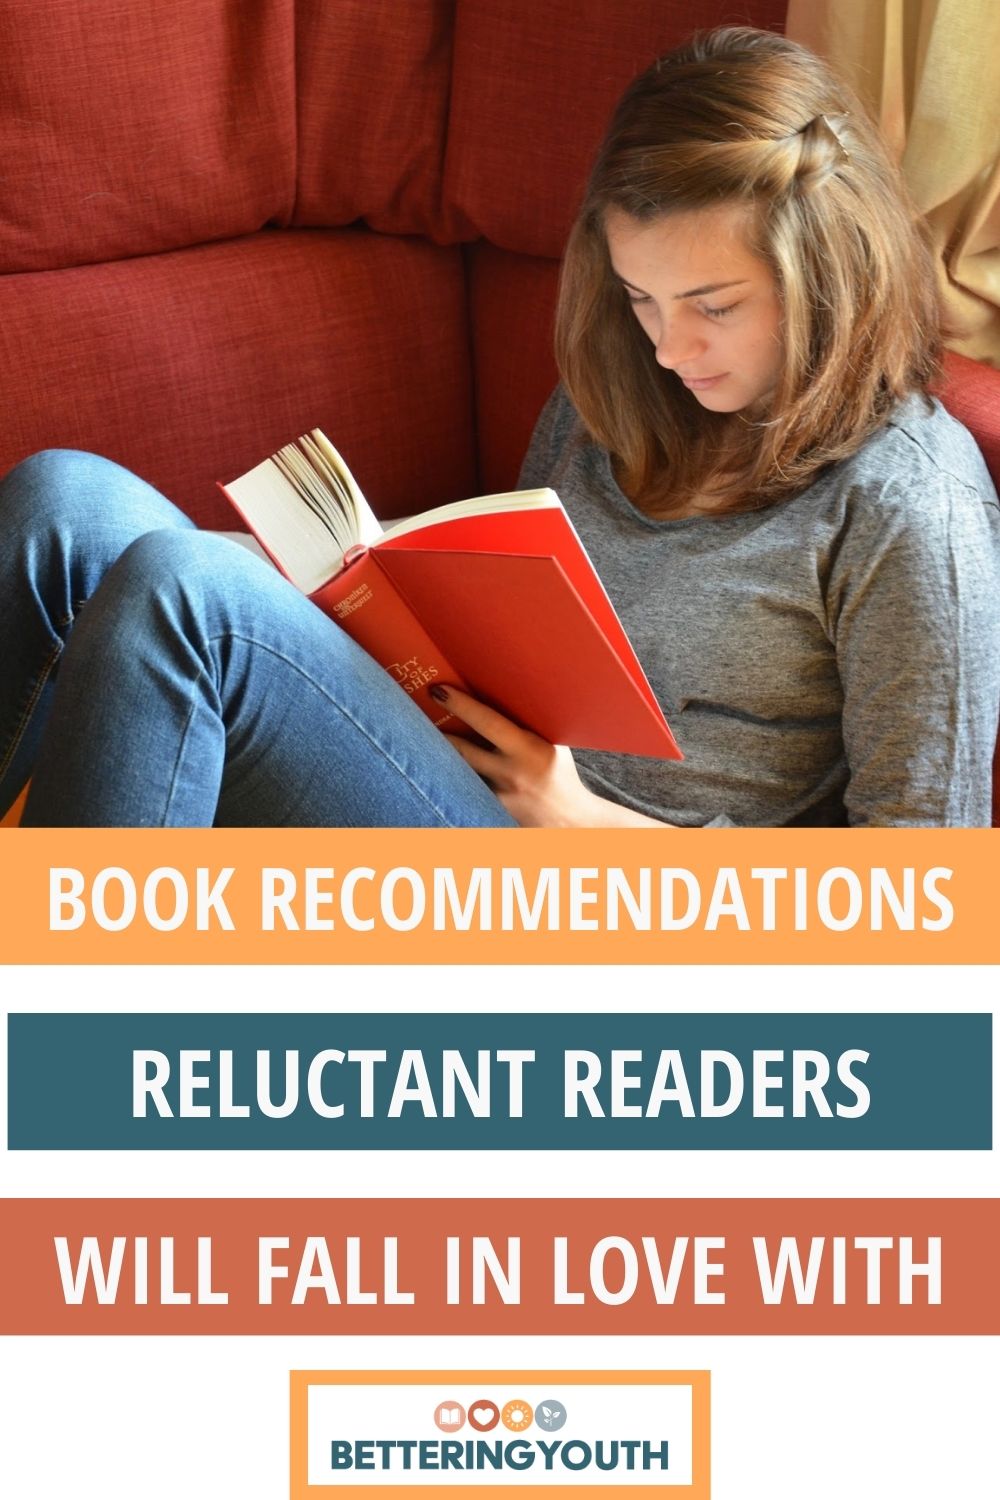 6 Book Recommendations Reluctant Readers will Love